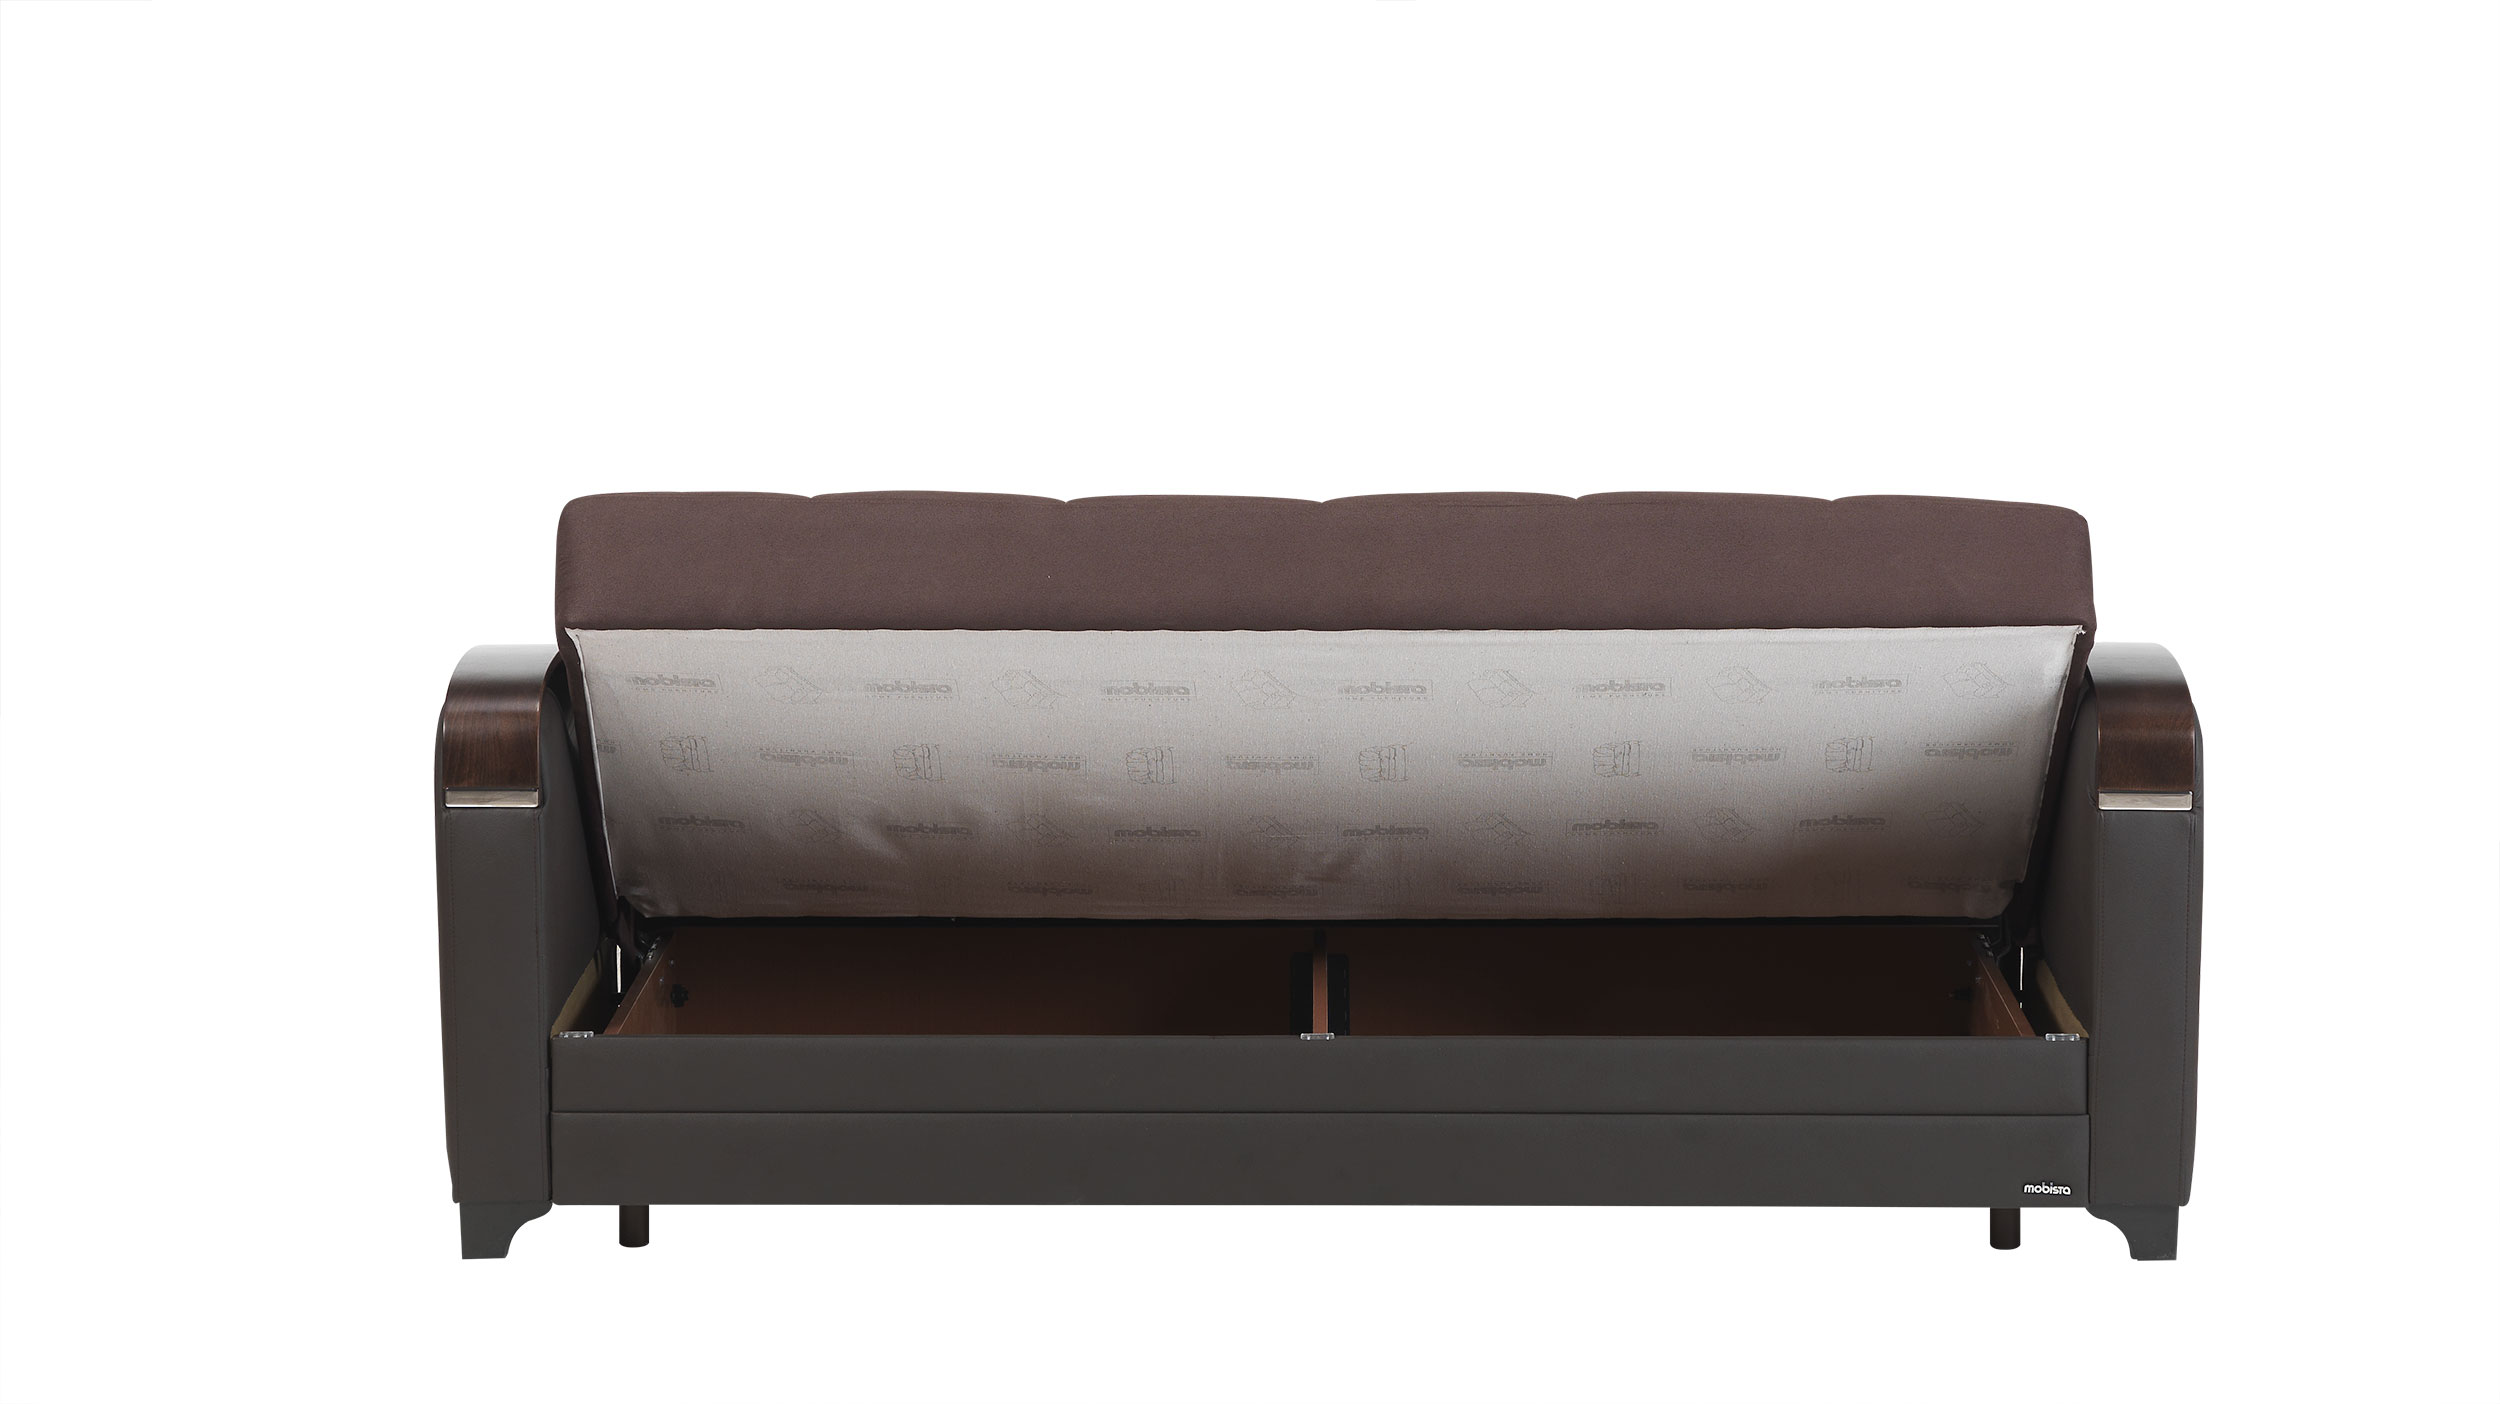 Mobetto Vintage Chocolate Fabric Sofa Bed by Mobista